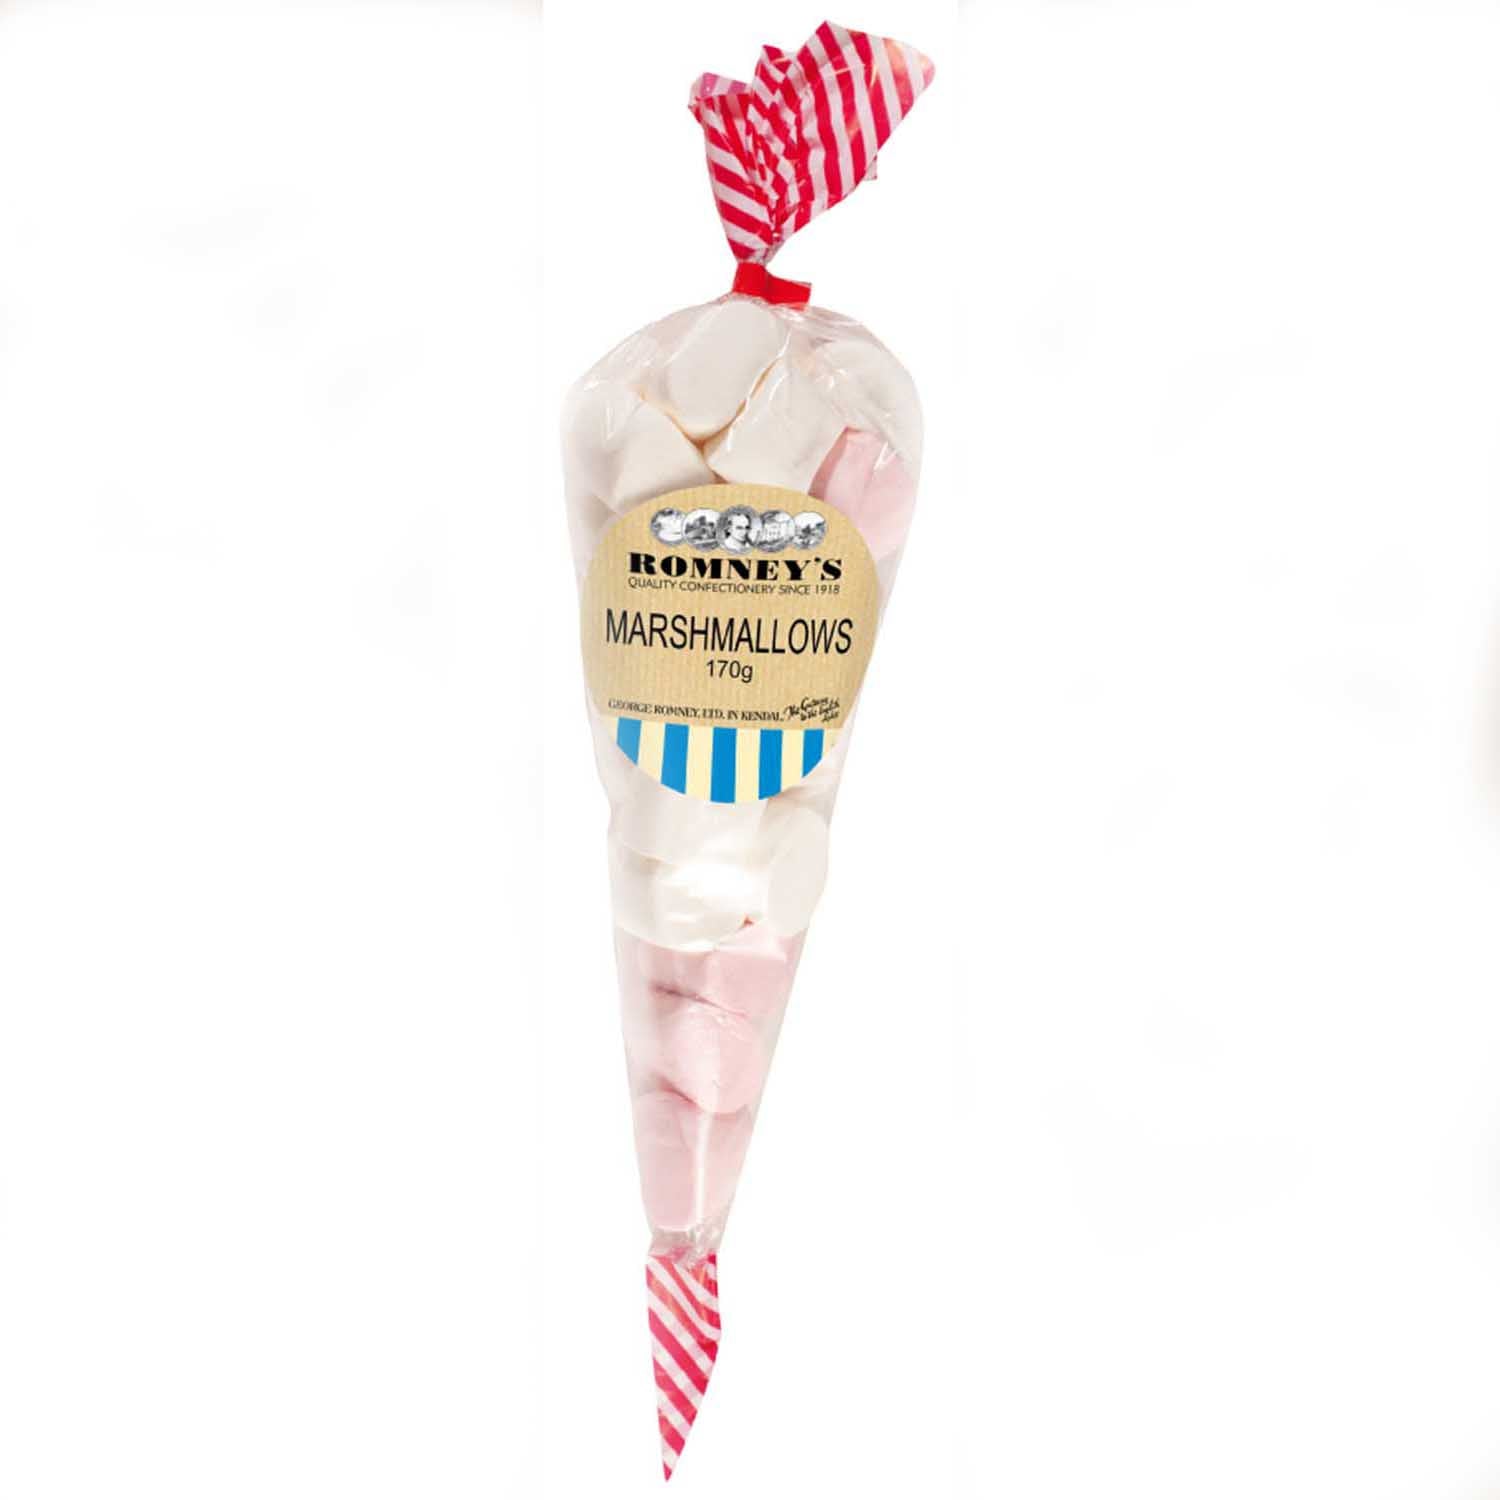 Marshmallow Cone Bags